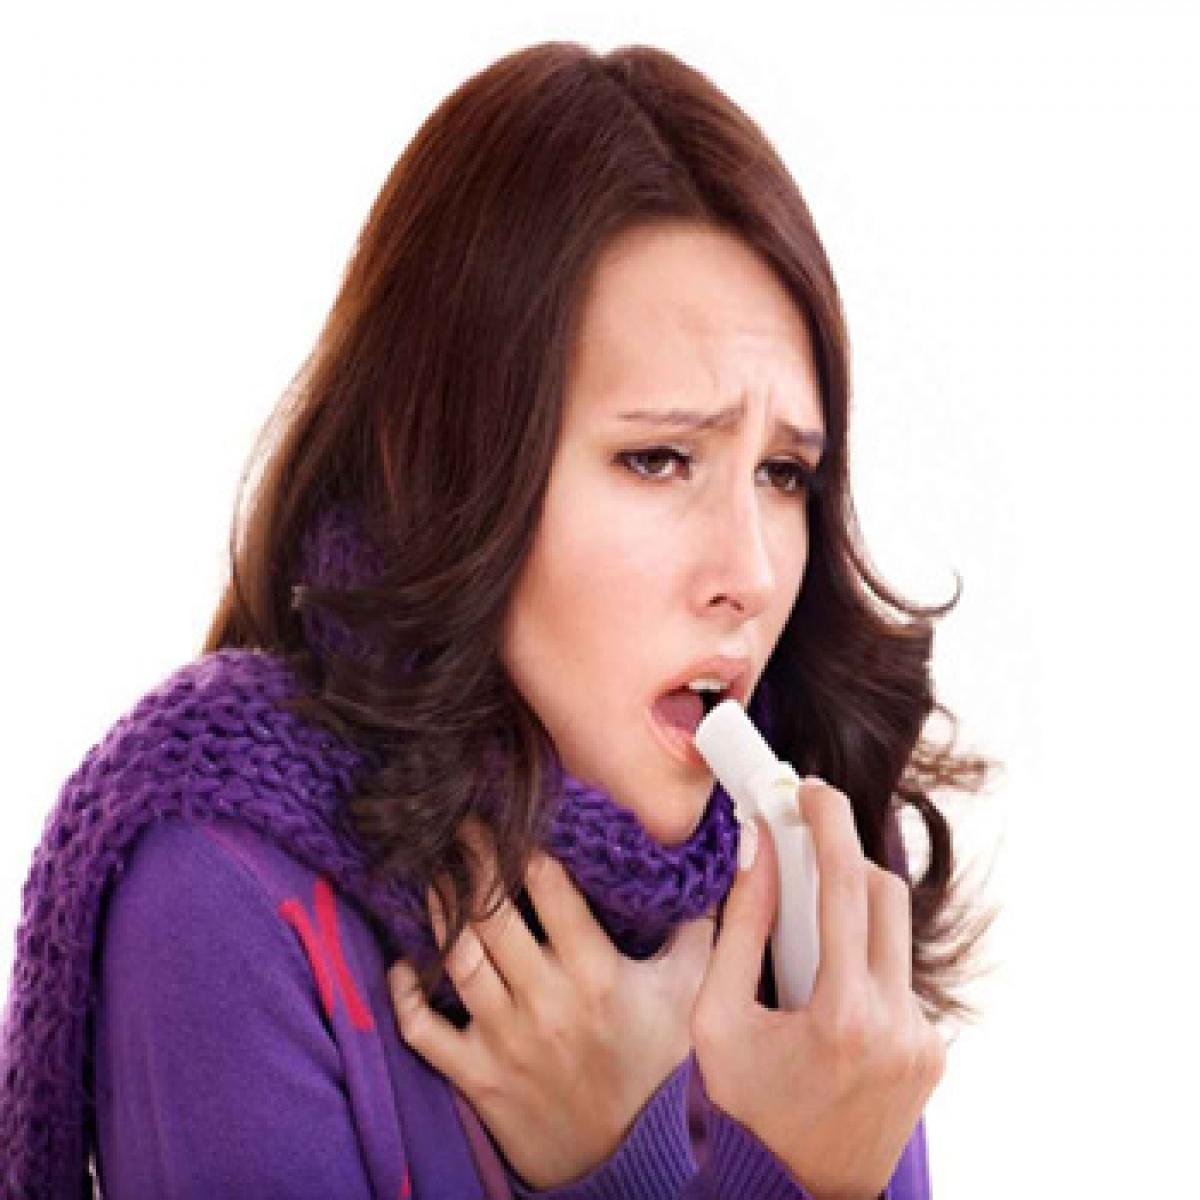 Excess weight can increase odds of asthma in women